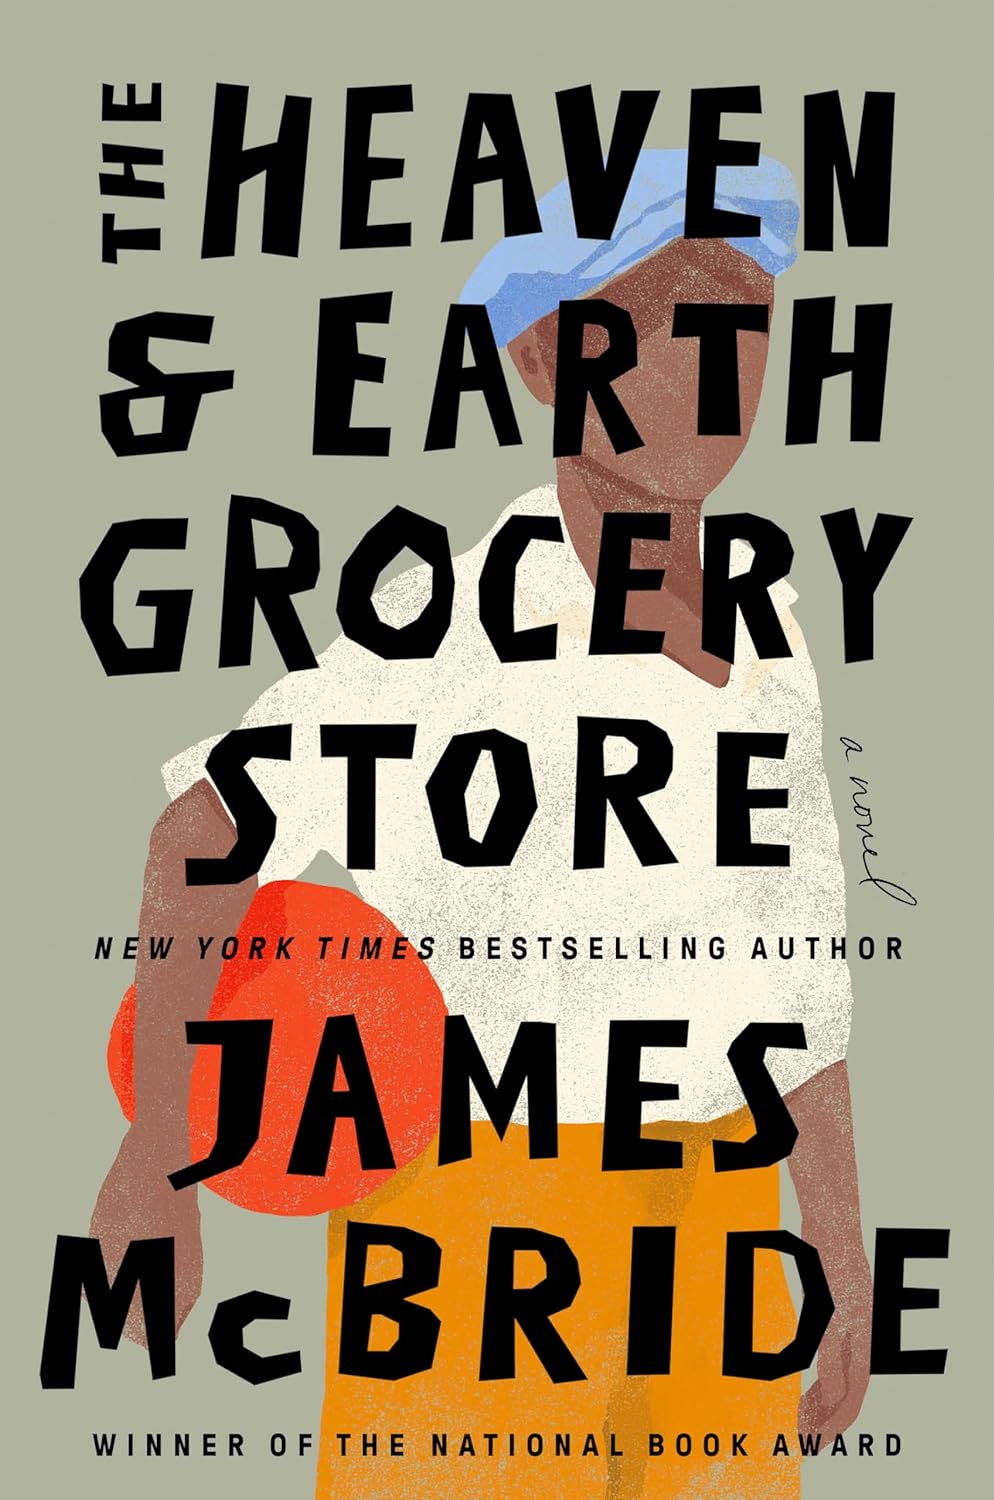 Books & Brunch will discuss "The Heaven & Earth Grocery Store" in April.